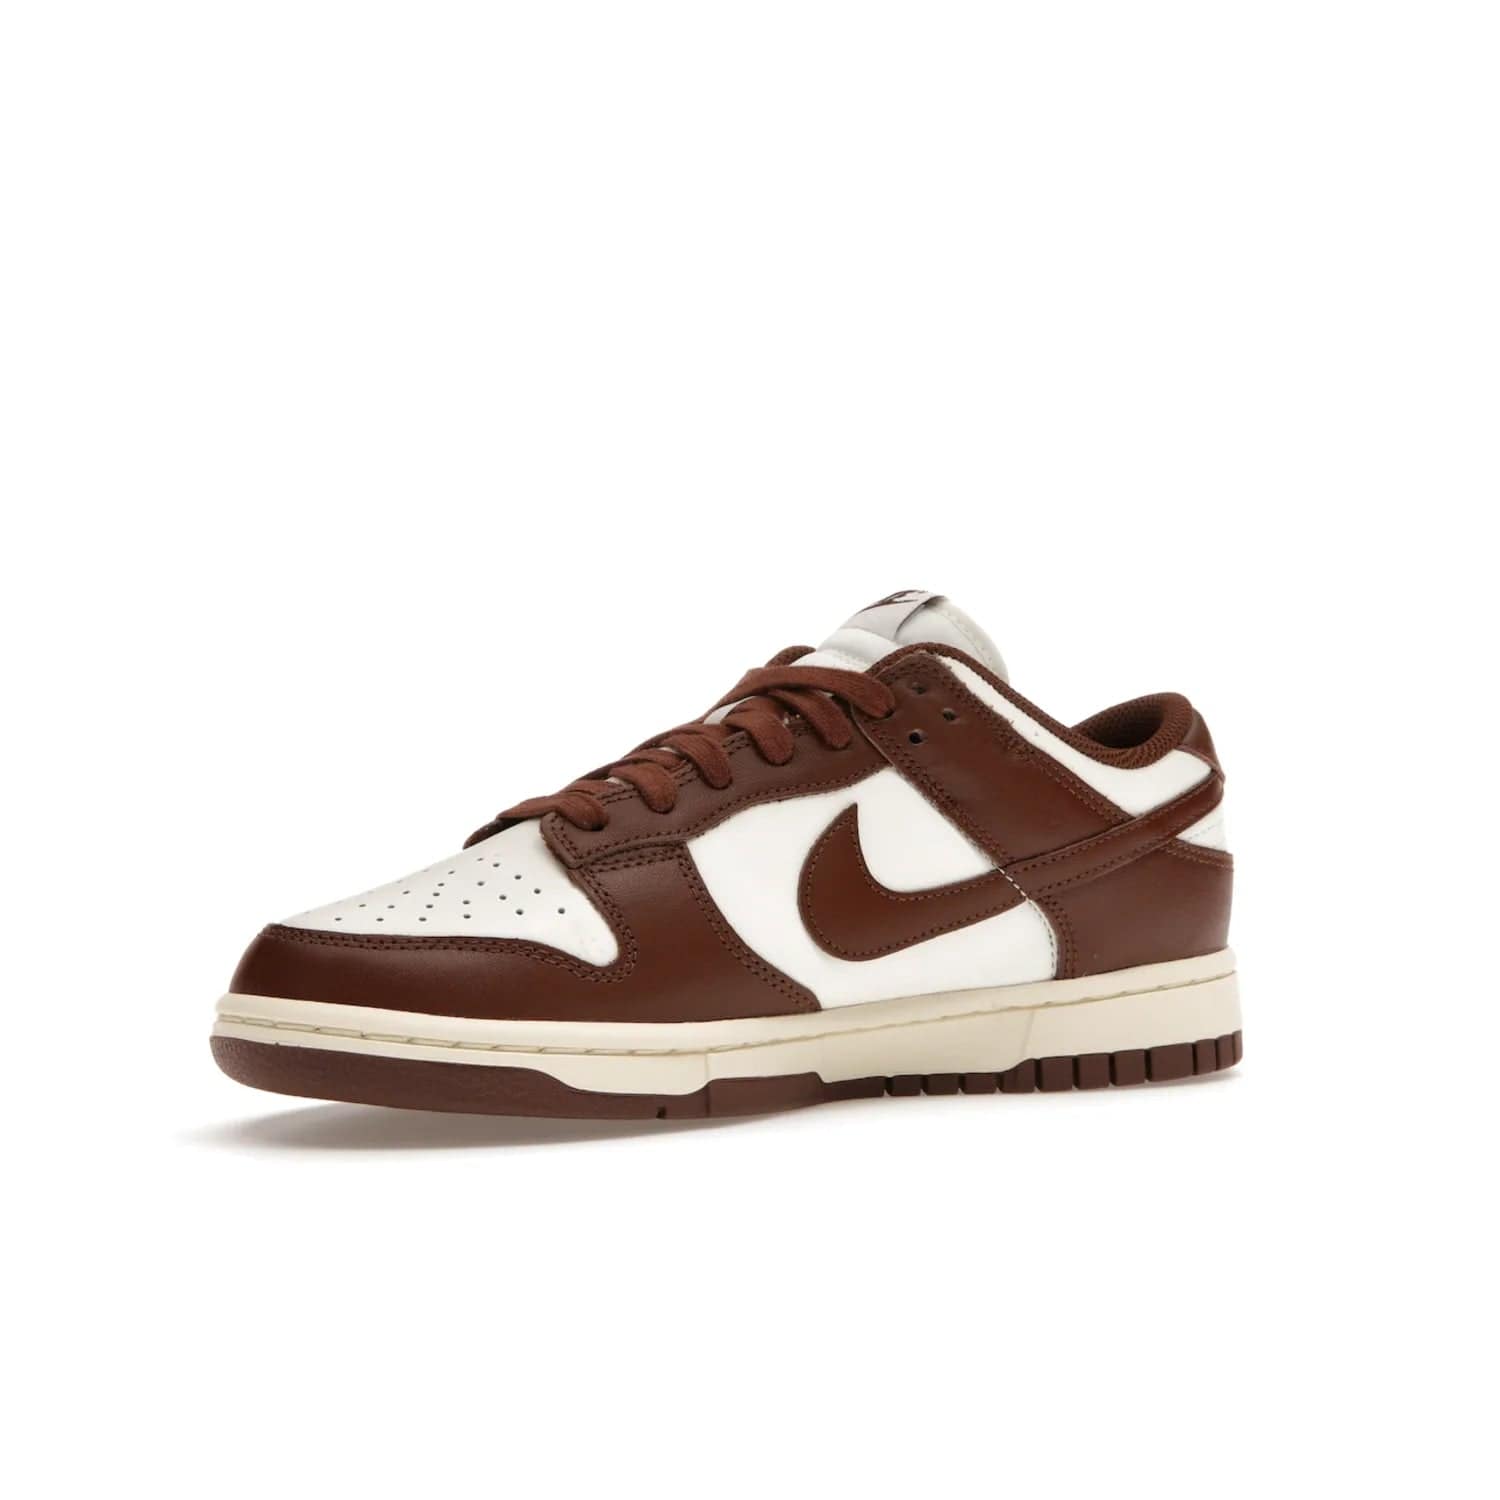 Nike Dunk Low Cacao Wow (Women's) - Image 16 - Only at www.BallersClubKickz.com - Revised
Get the Nike Dunk Low Cacao Wow and make a statement! Plush leather and a cool Cacao Wow finish bring together a unique mix of comfort and fashion that will turn heads. Boosted with a Coconut Milk hue. Shop today.